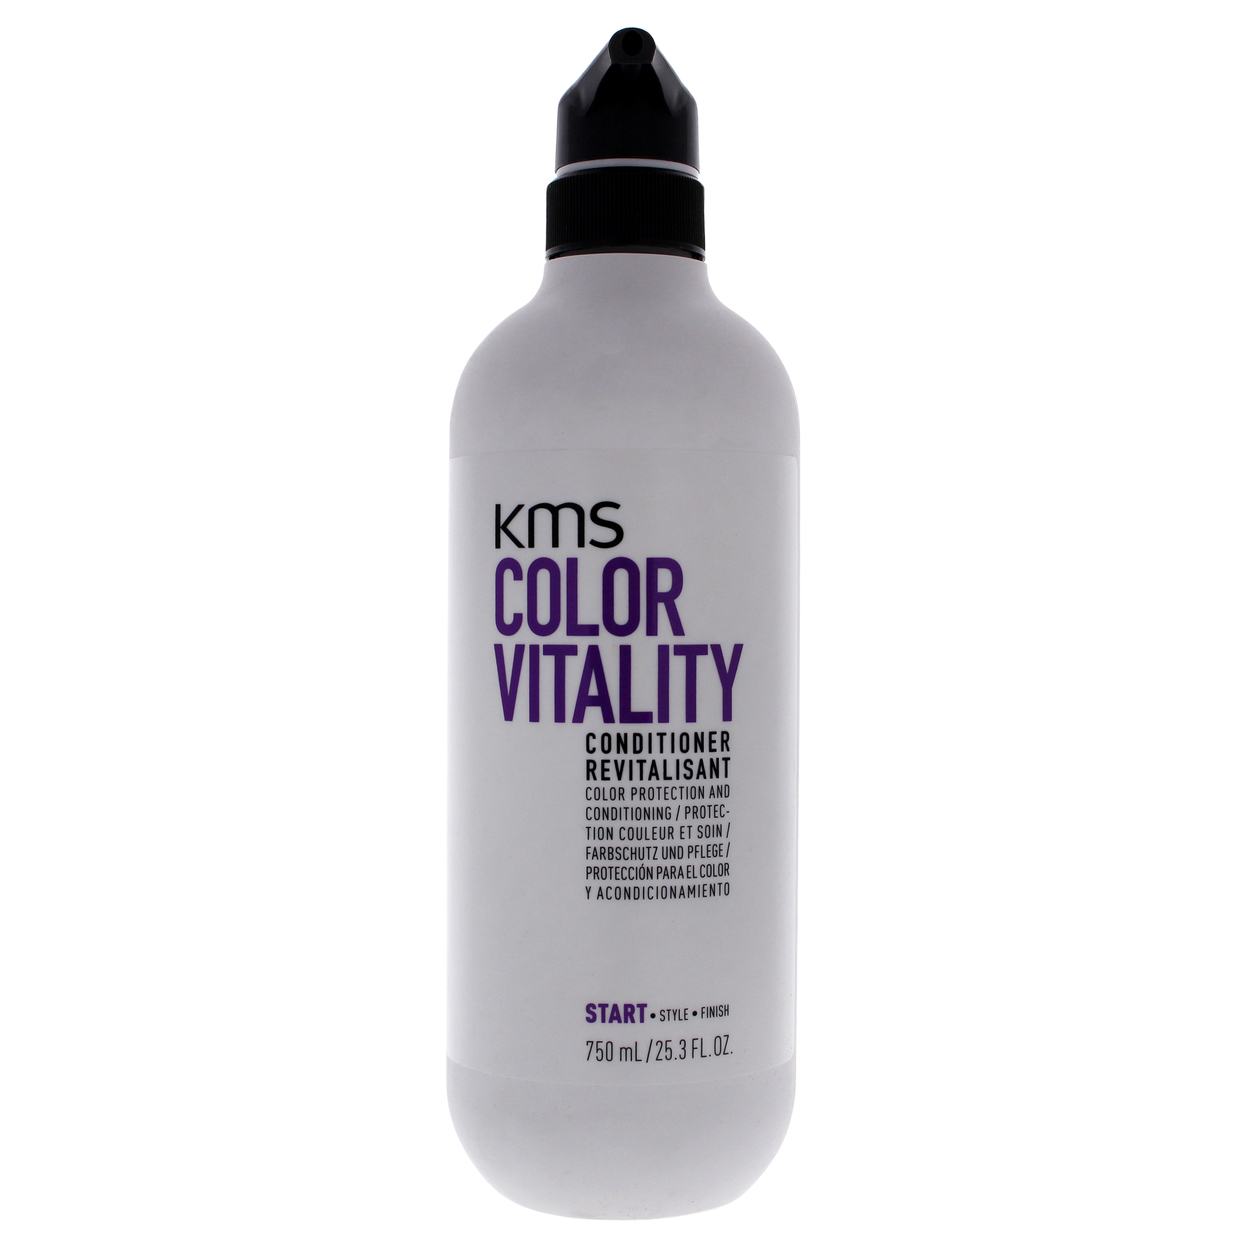 KMS Unisex HAIRCARE Color Vitality Conditioner 25.3 Oz